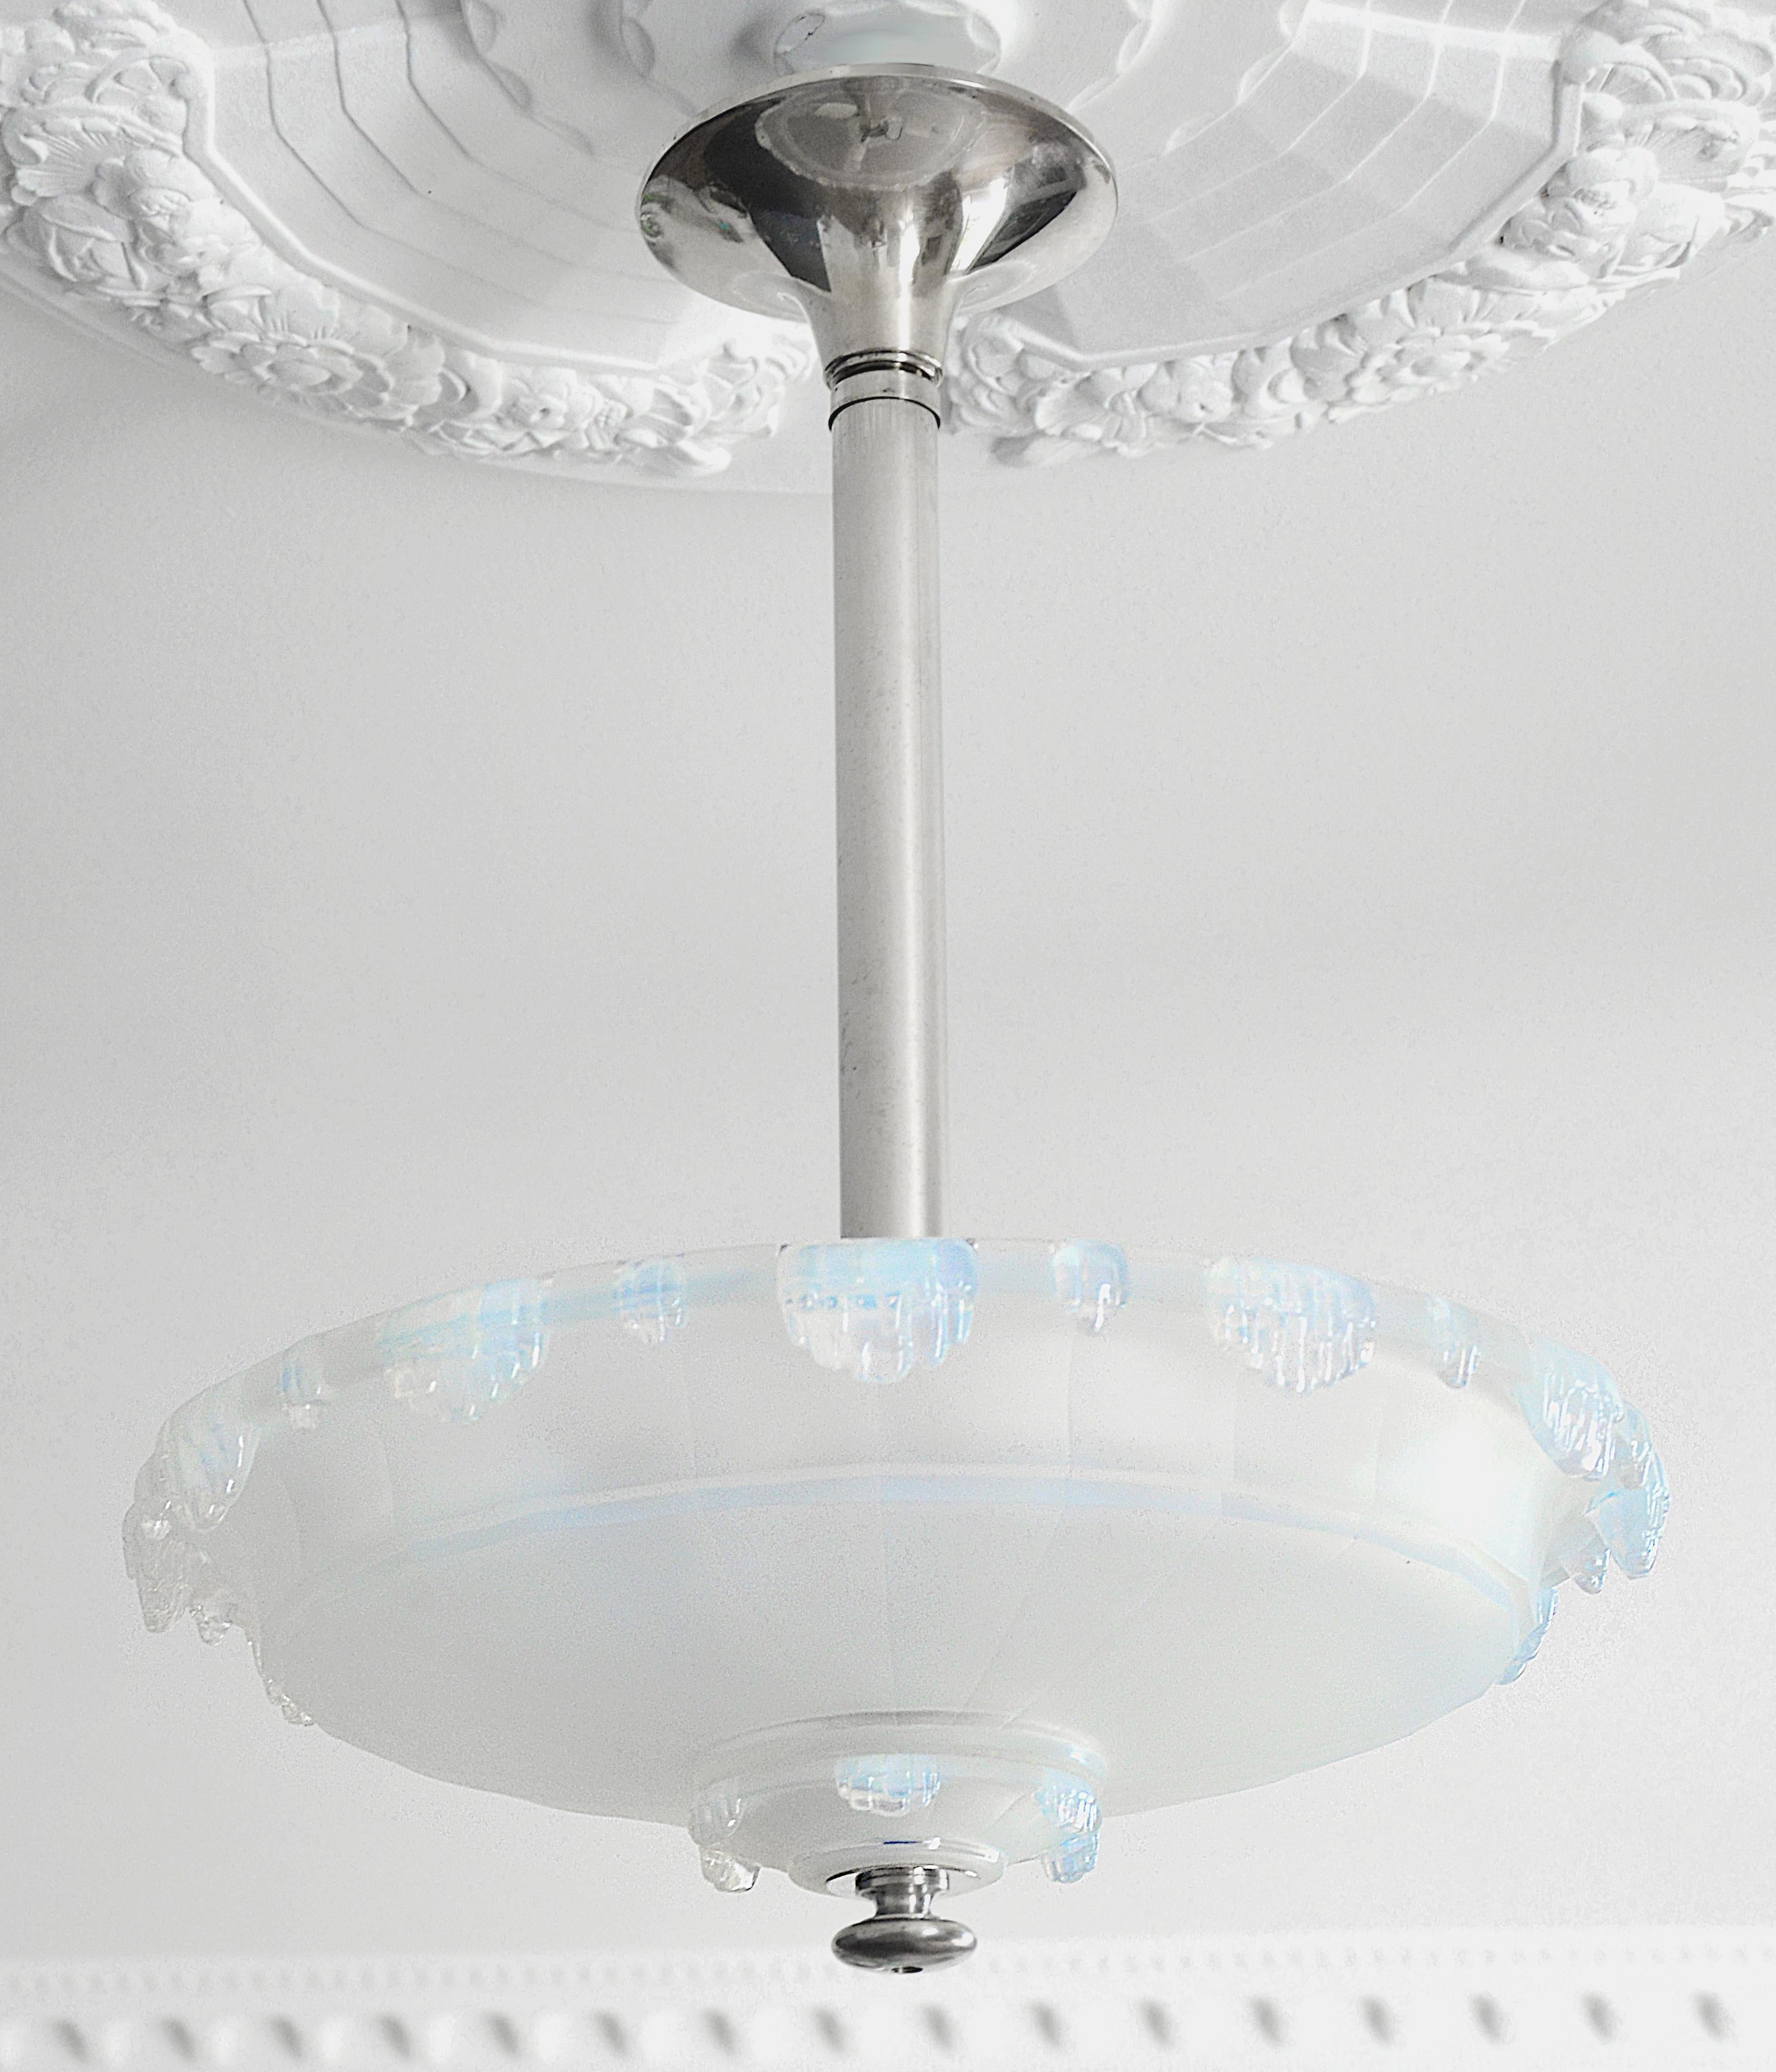 Glass Jean Gauthier, French Art Deco Modernist Opalescent Pendant Chandelier, 1920s For Sale